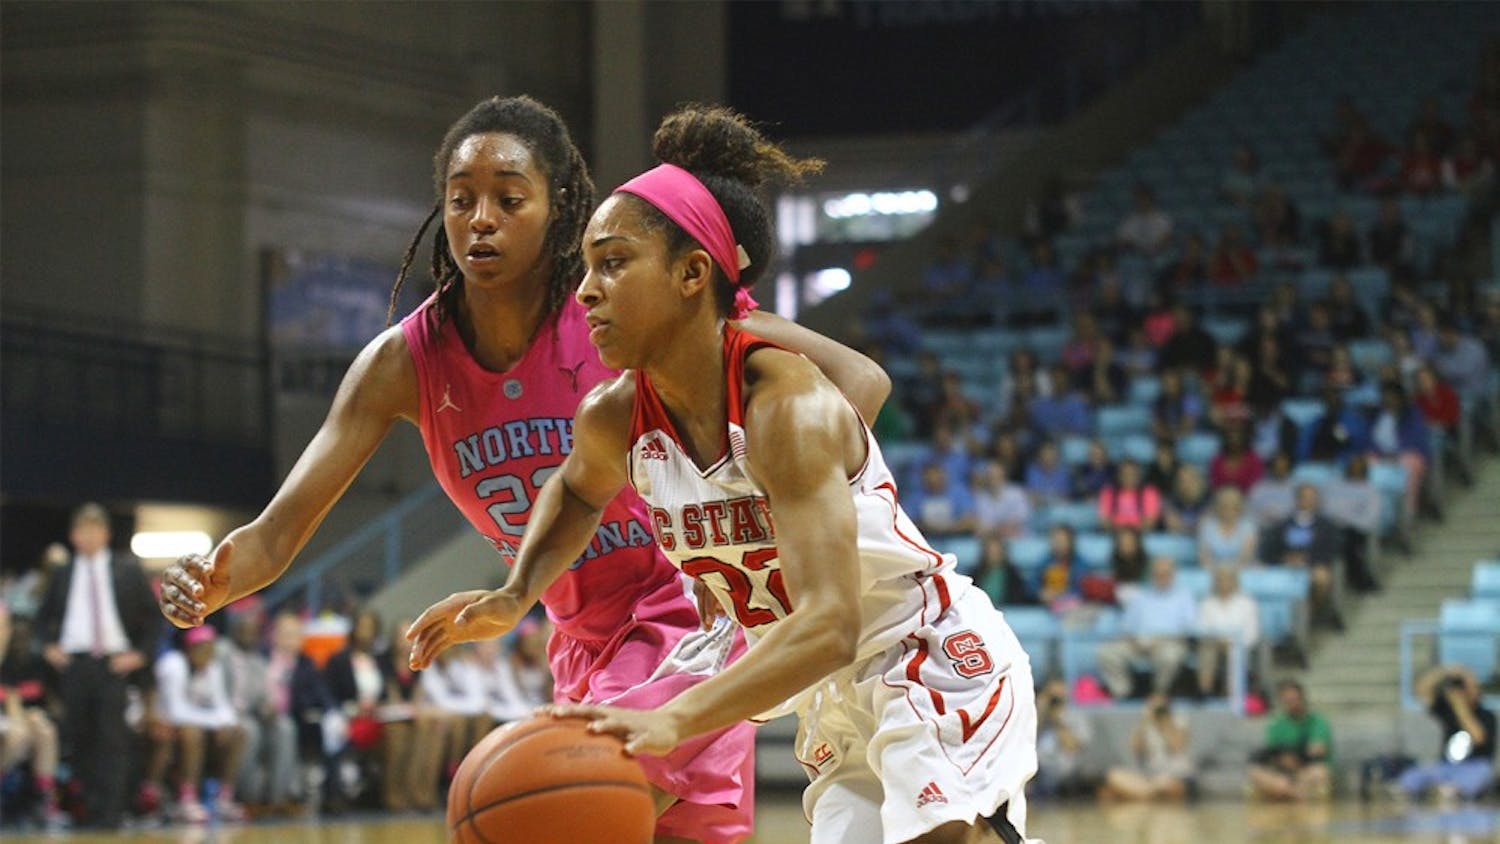 Senior guard N’Dea Bryant (22) defends Dominique  Wilson (right) during the game against NC State on Sunday.